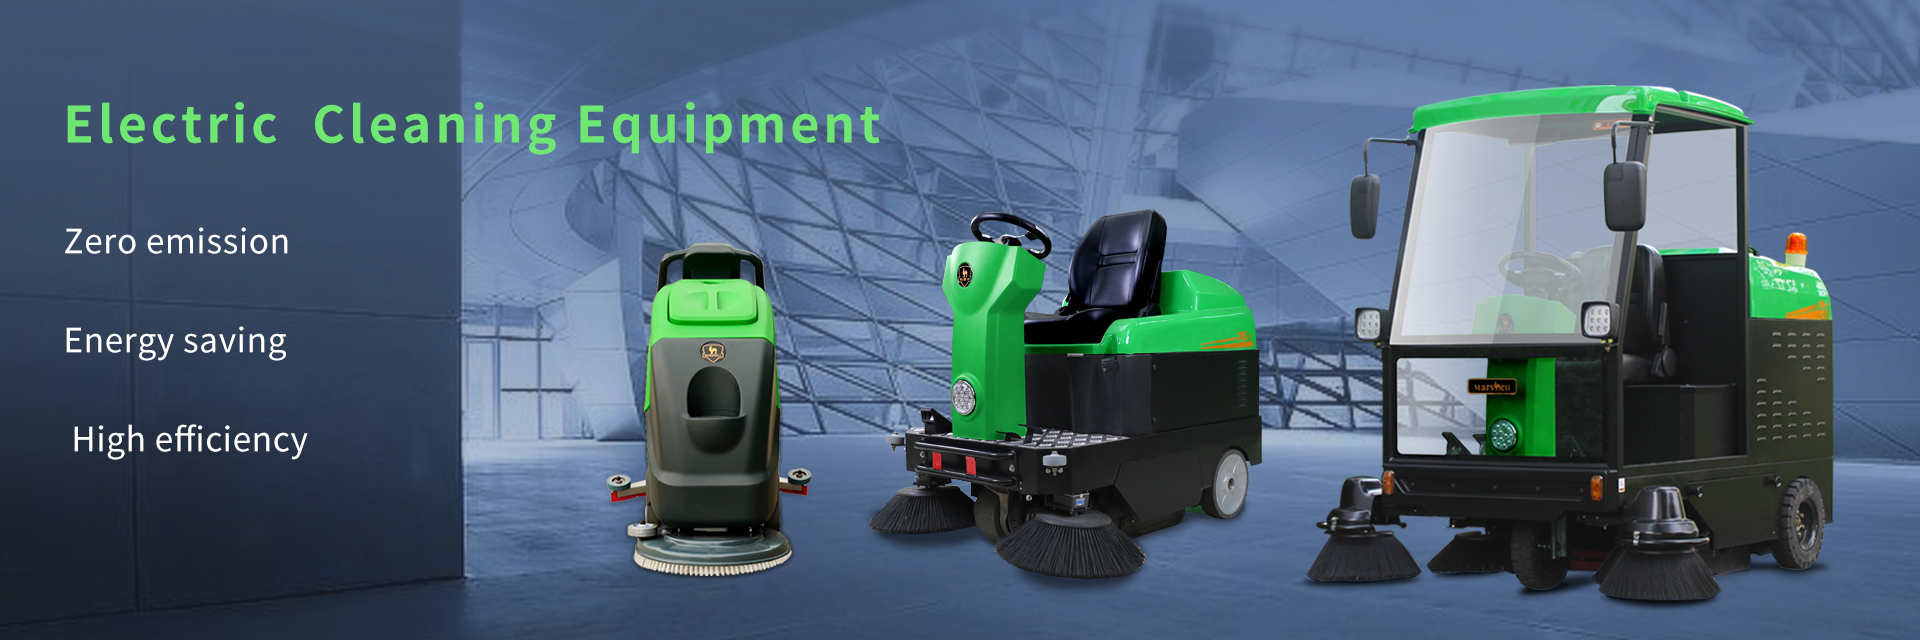 Electric Cleaning Equipment